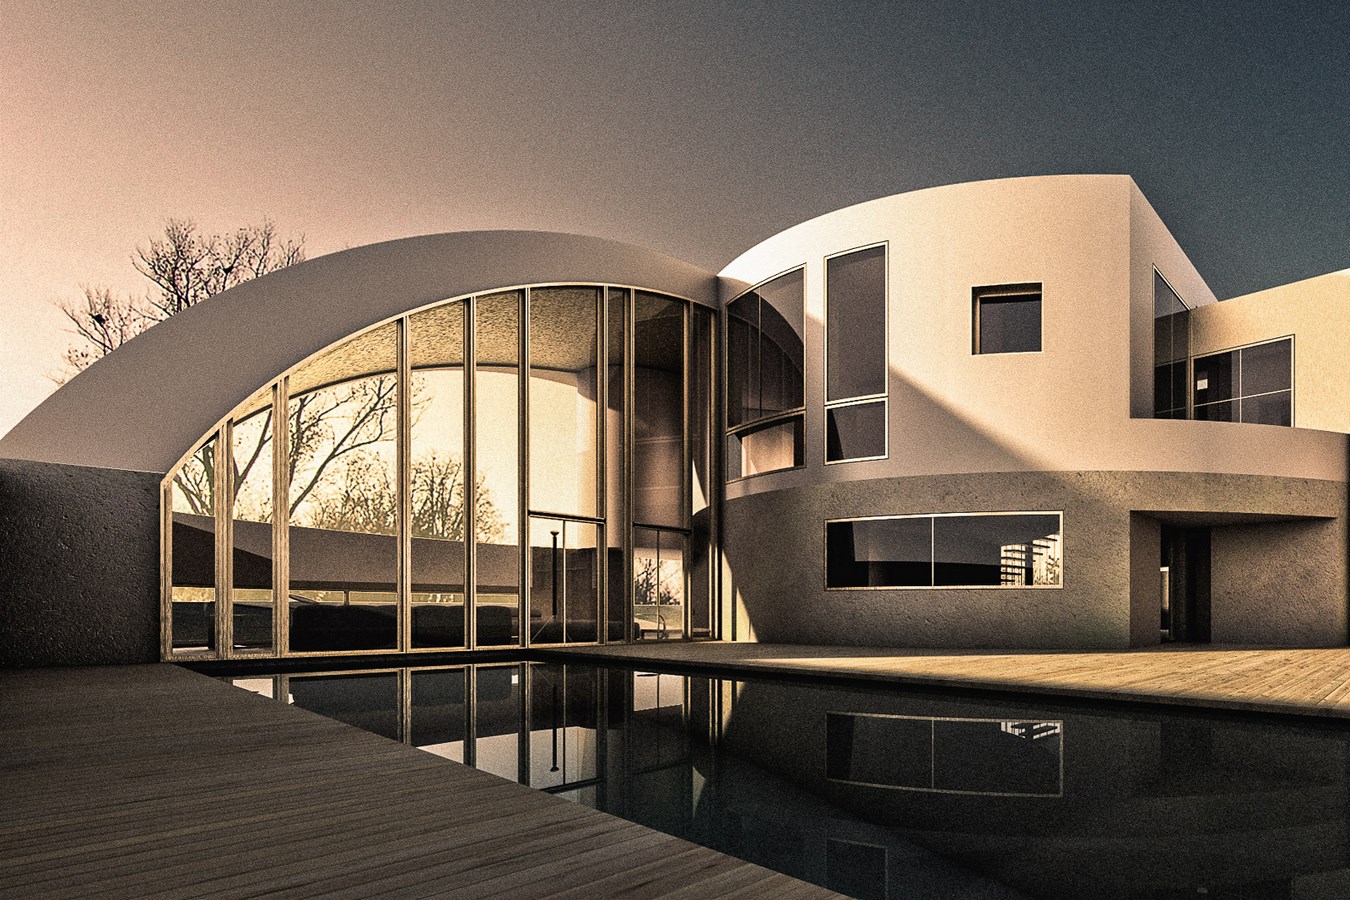 10 Projects of Antonino Cardillo every Architect must visit! - House of Twelve - Sheet2